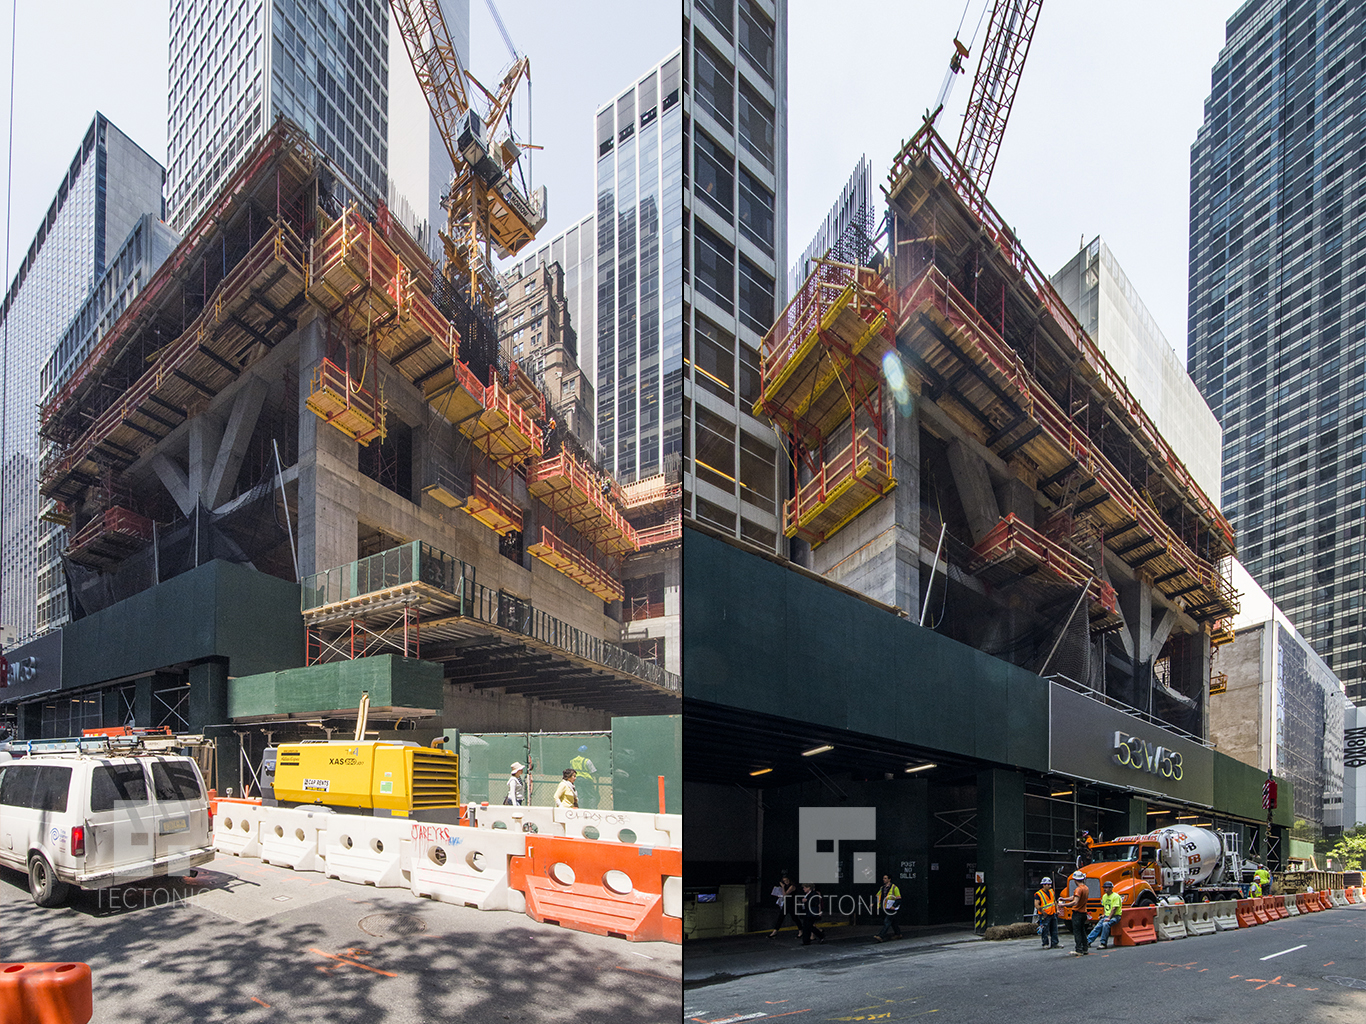 Construction at 53W53. Photos by Tectonic